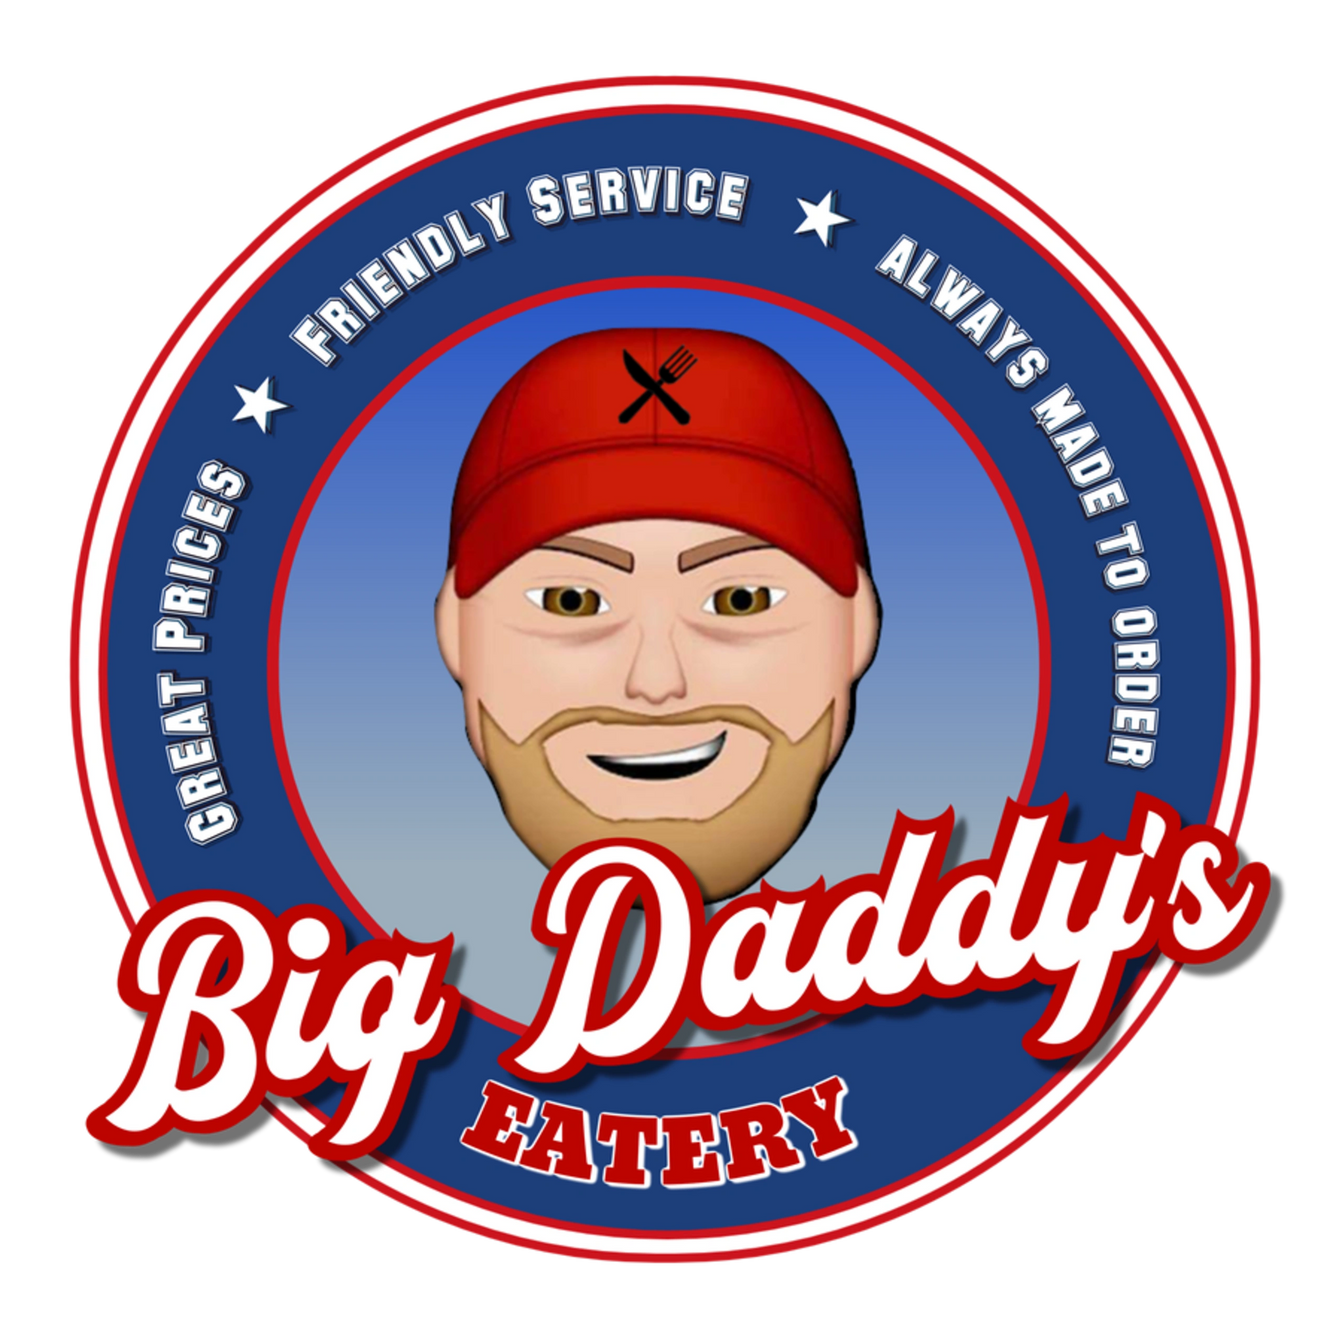 Big Daddy's Eatery Home